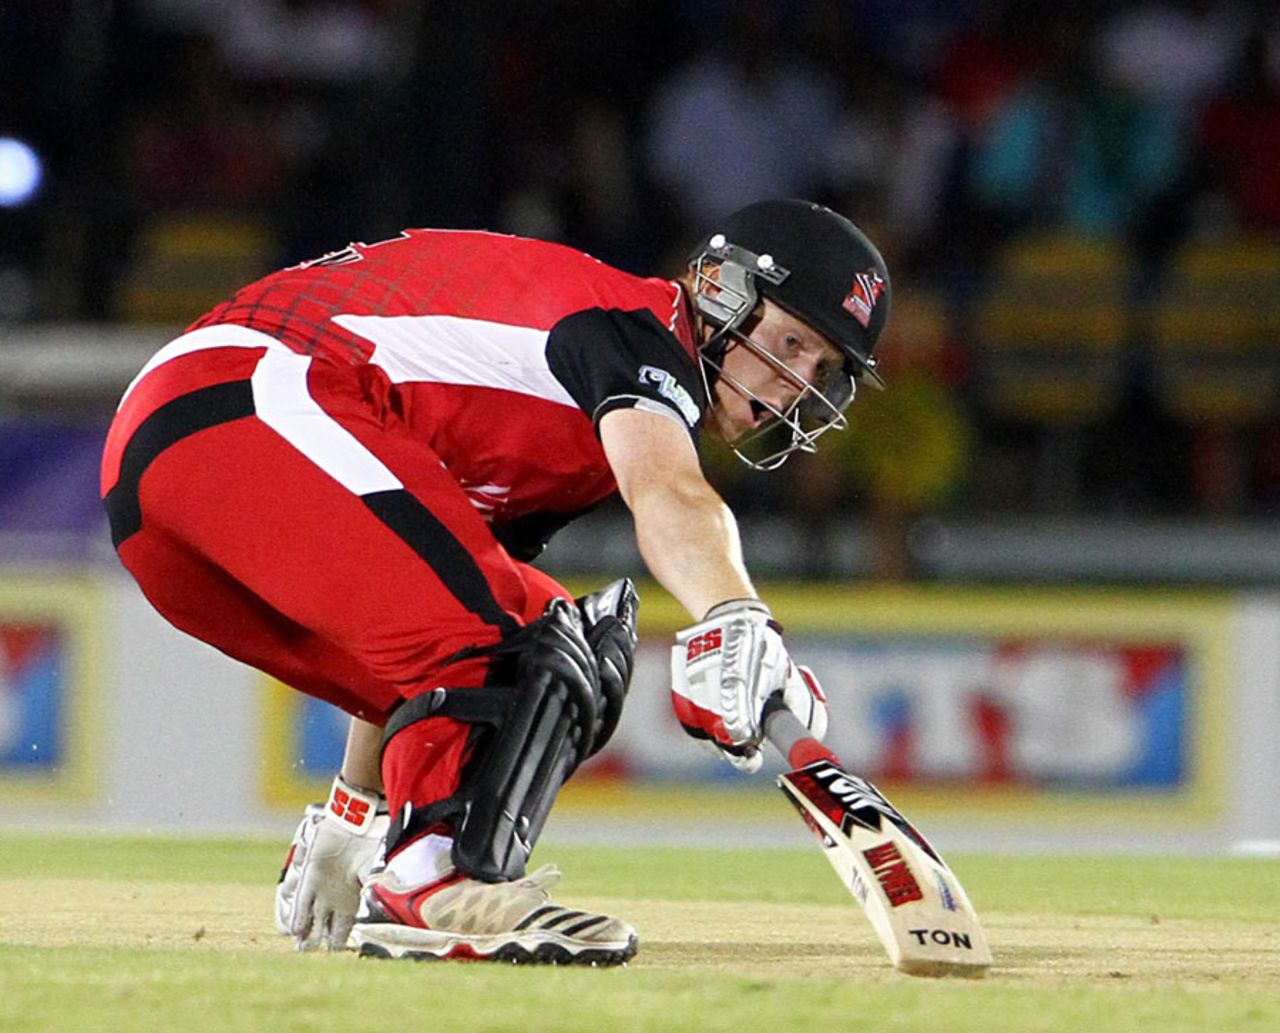 Kevin O'Brien powered his way to a 47-ball 70, Trinidad & Tobago Red Steel v Guyana Amazon Warriors, Caribbean Premier League 2013, Port-of-Spain, August 9, 2013